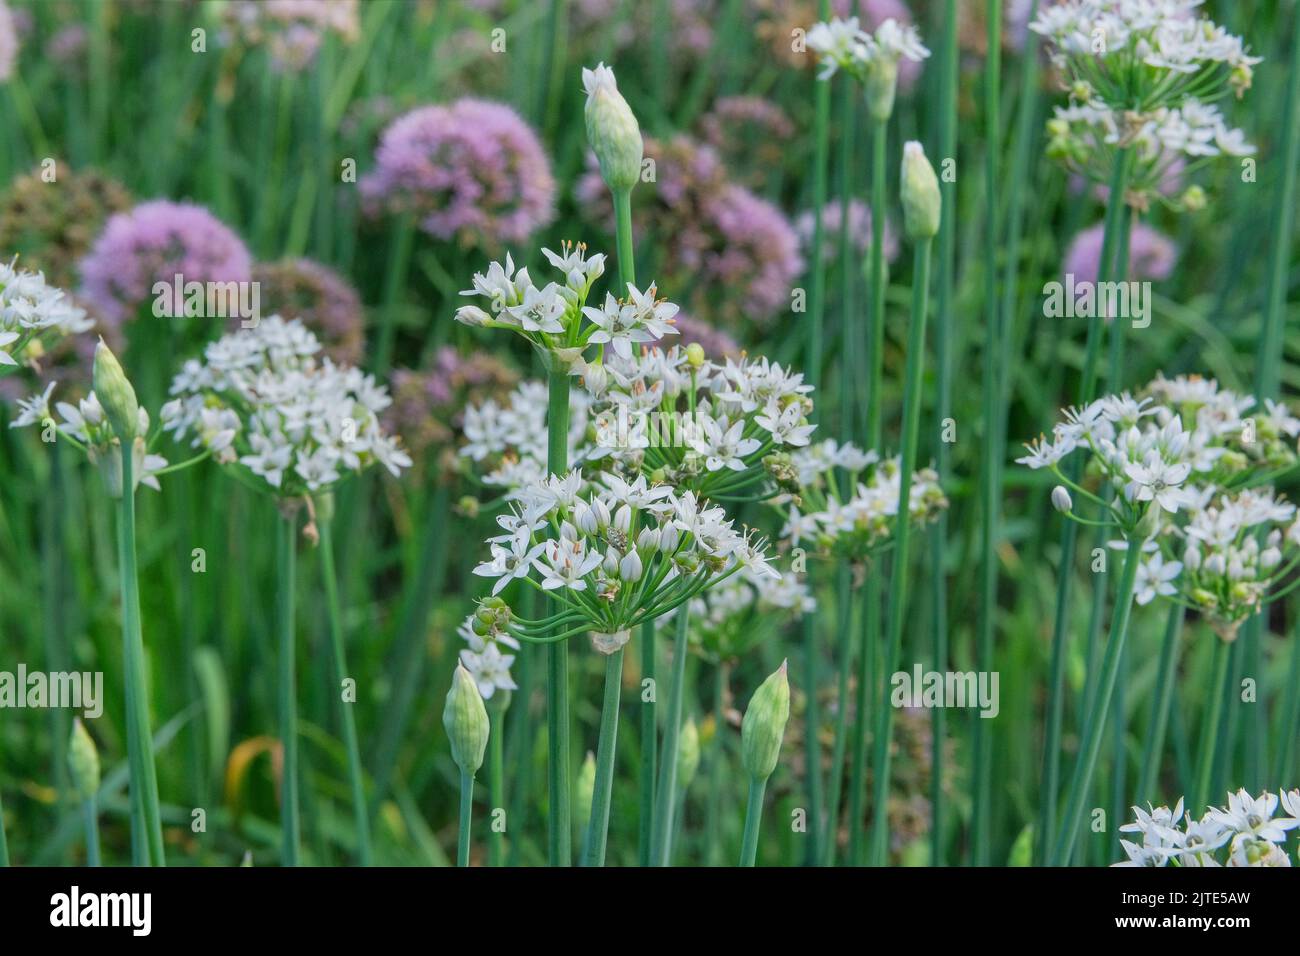 Onion flowers in farming and harvesting. Organic vegetables grown in a rustic farm garden. Growing vegetables at home. Stock Photo